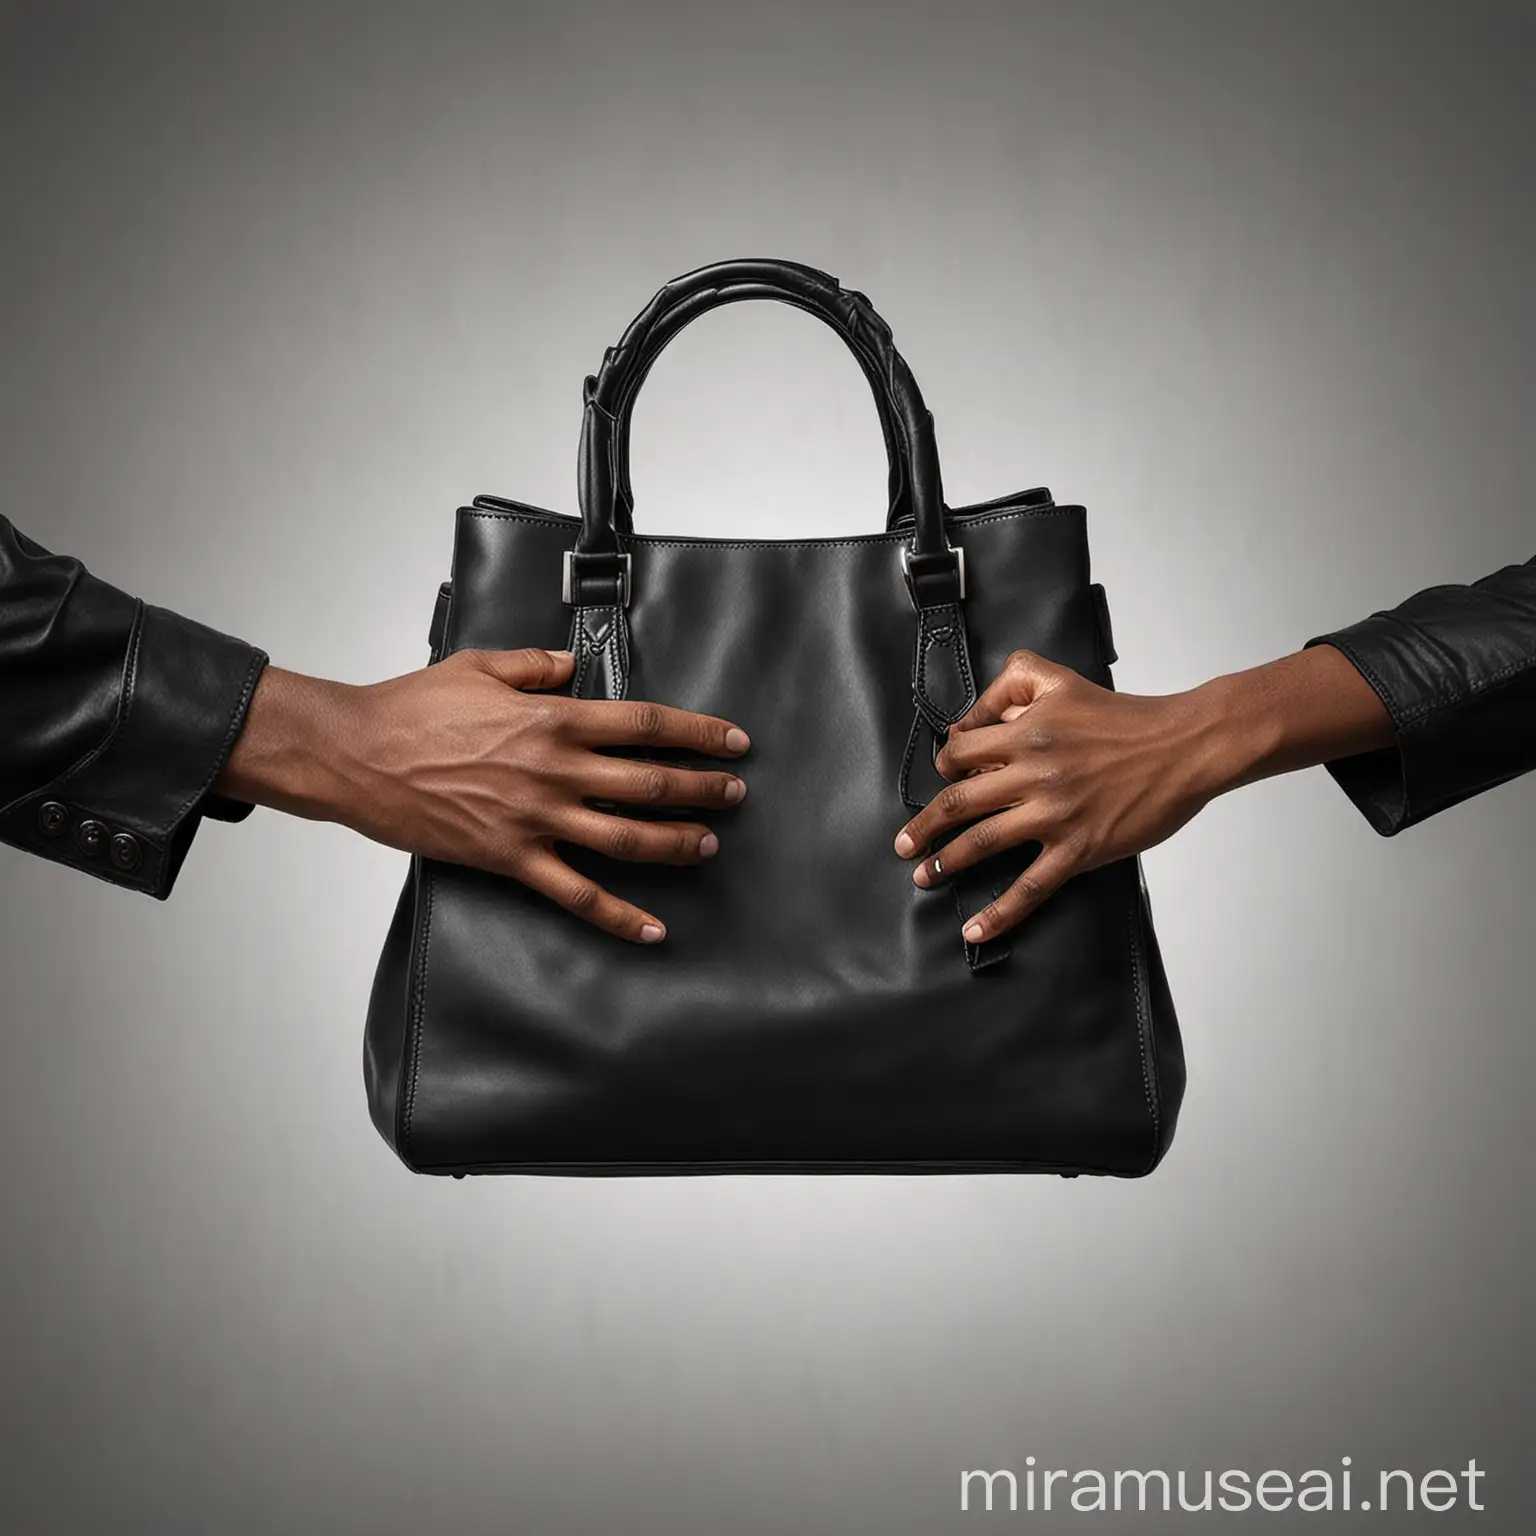 Two African hands fighting over a black handbag png